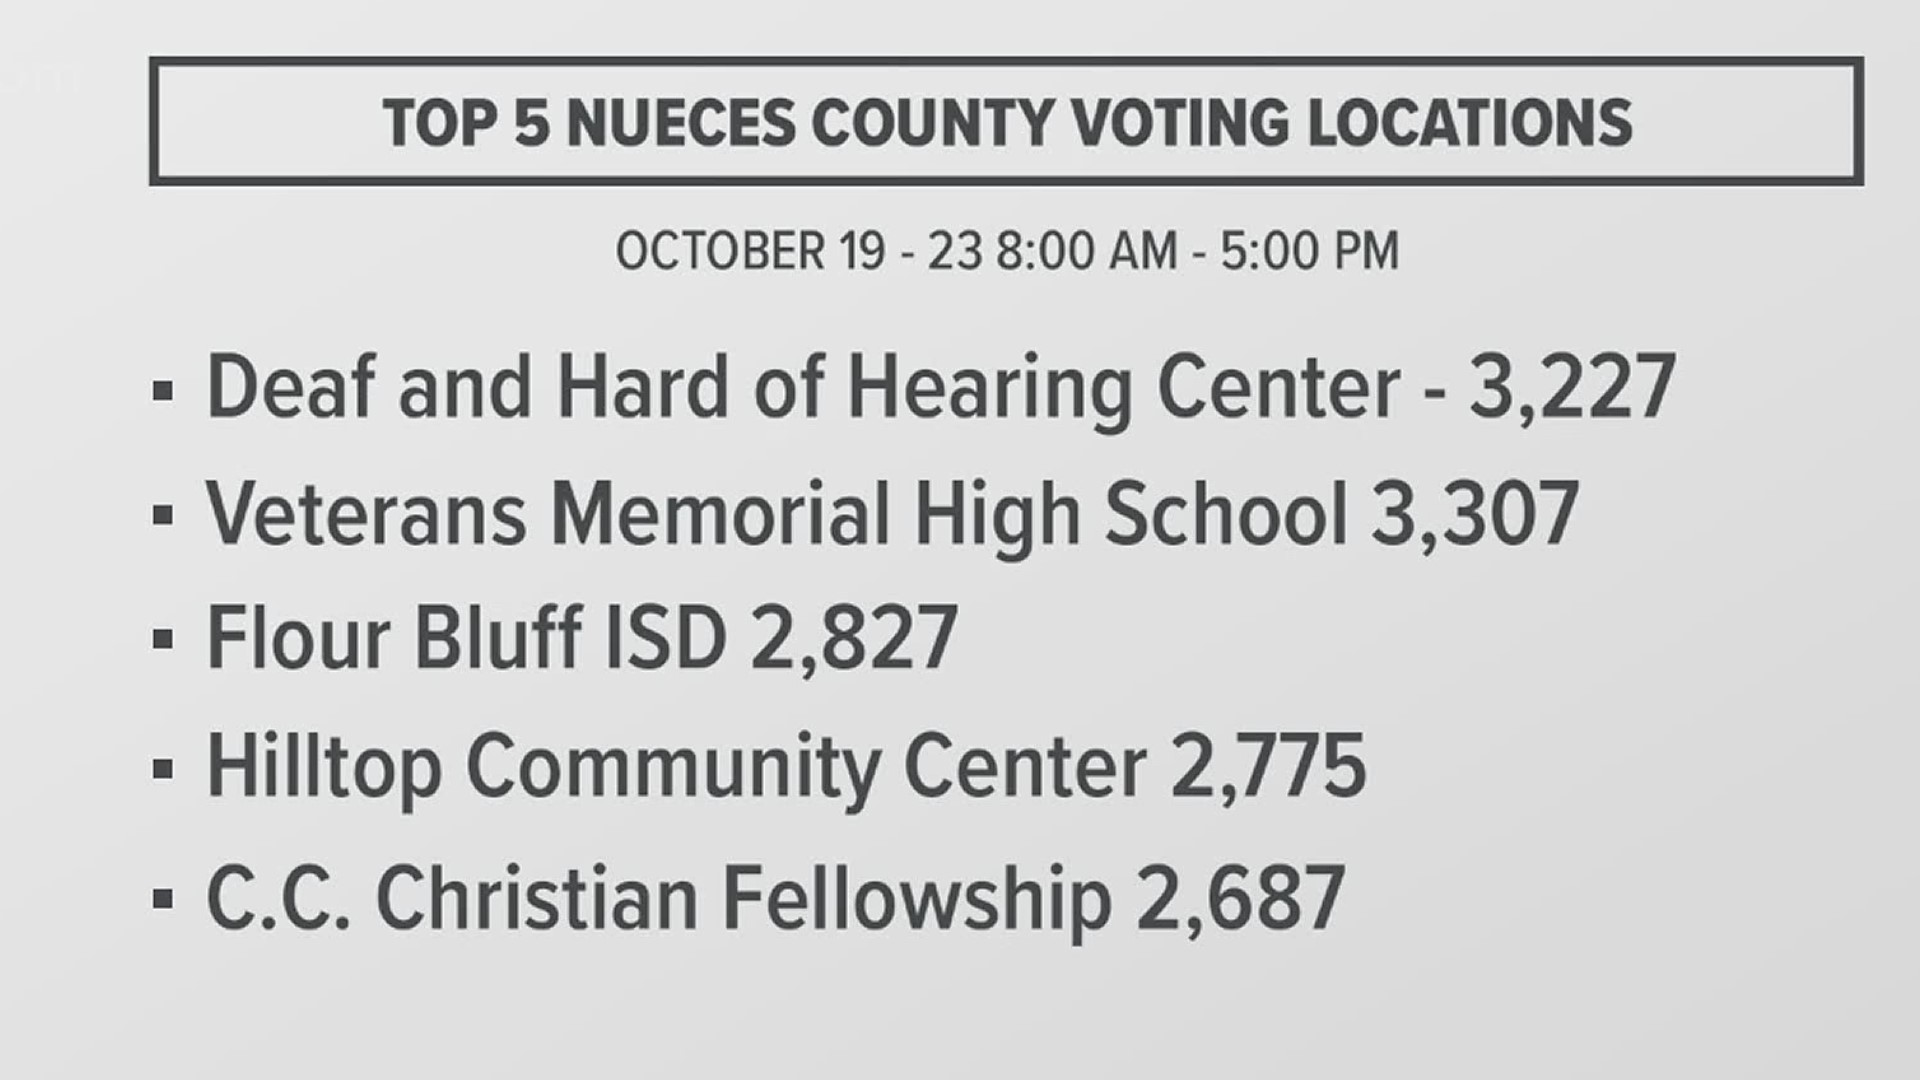 If you're looking to avoid some of the voting lines, we have a list of some of the busiest polling centers in Nueces County.